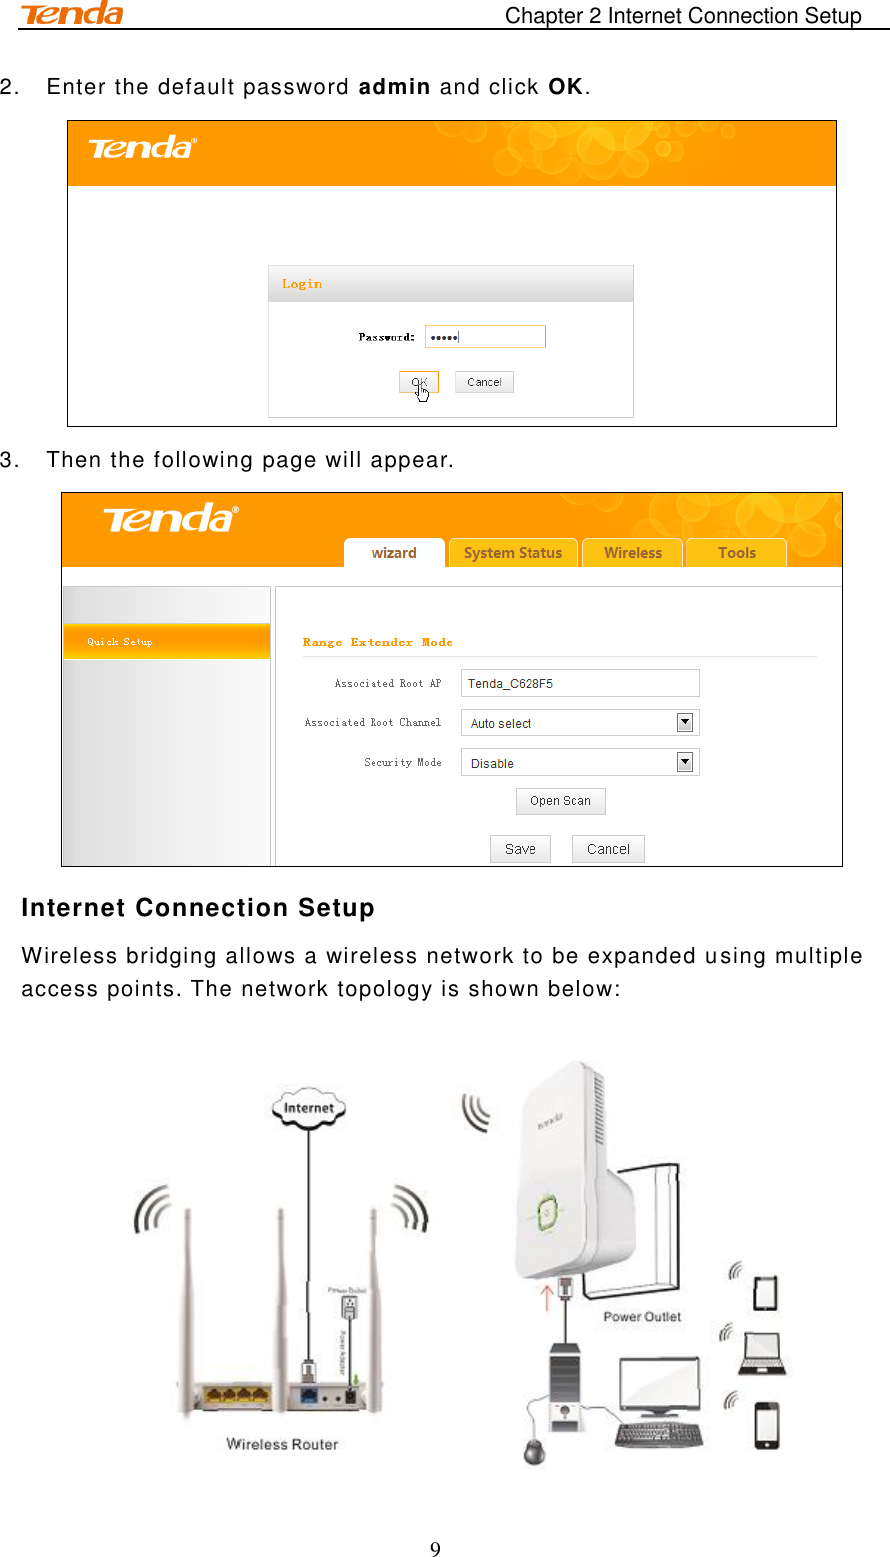                                                                       Chapter 2 Internet Connection Setup 9 2.  Enter the default password admin and click OK.  3.  Then the following page will appear.  Internet Connection Setup Wireless bridging allows a wireless network to be expanded using multiple access points. The network topology is shown below:    